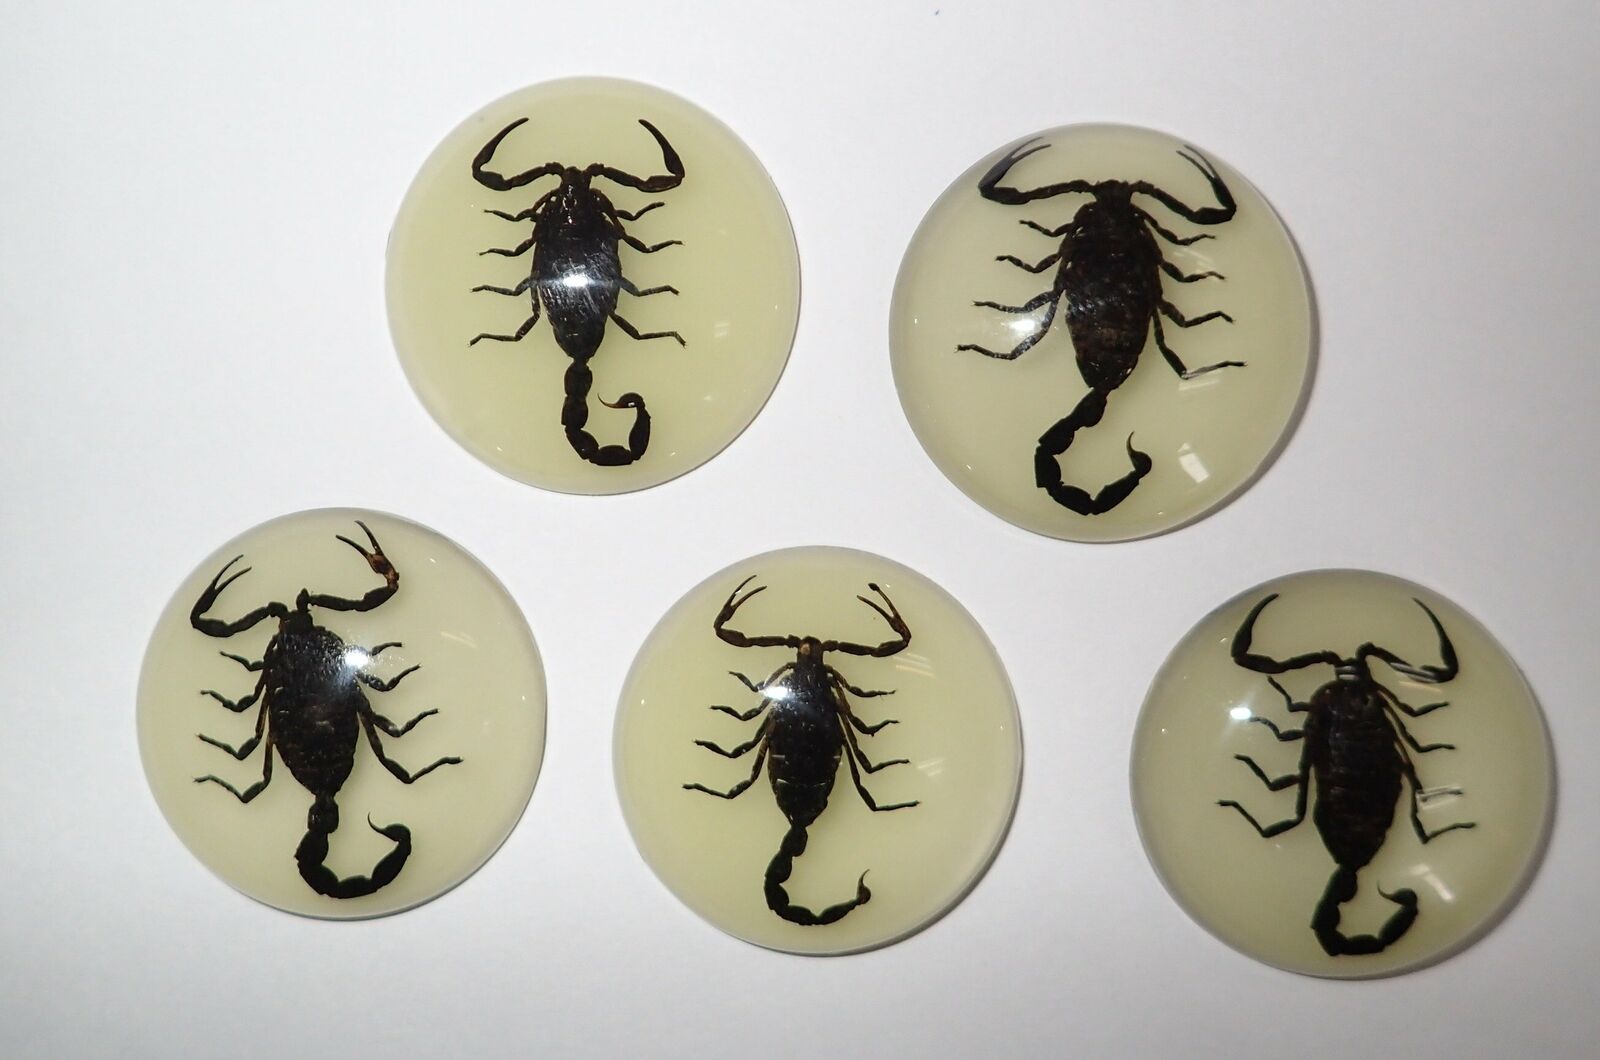 Insect Cabochon Black Scorpion 35 mm Round Glow in the dark 10 pieces Lot